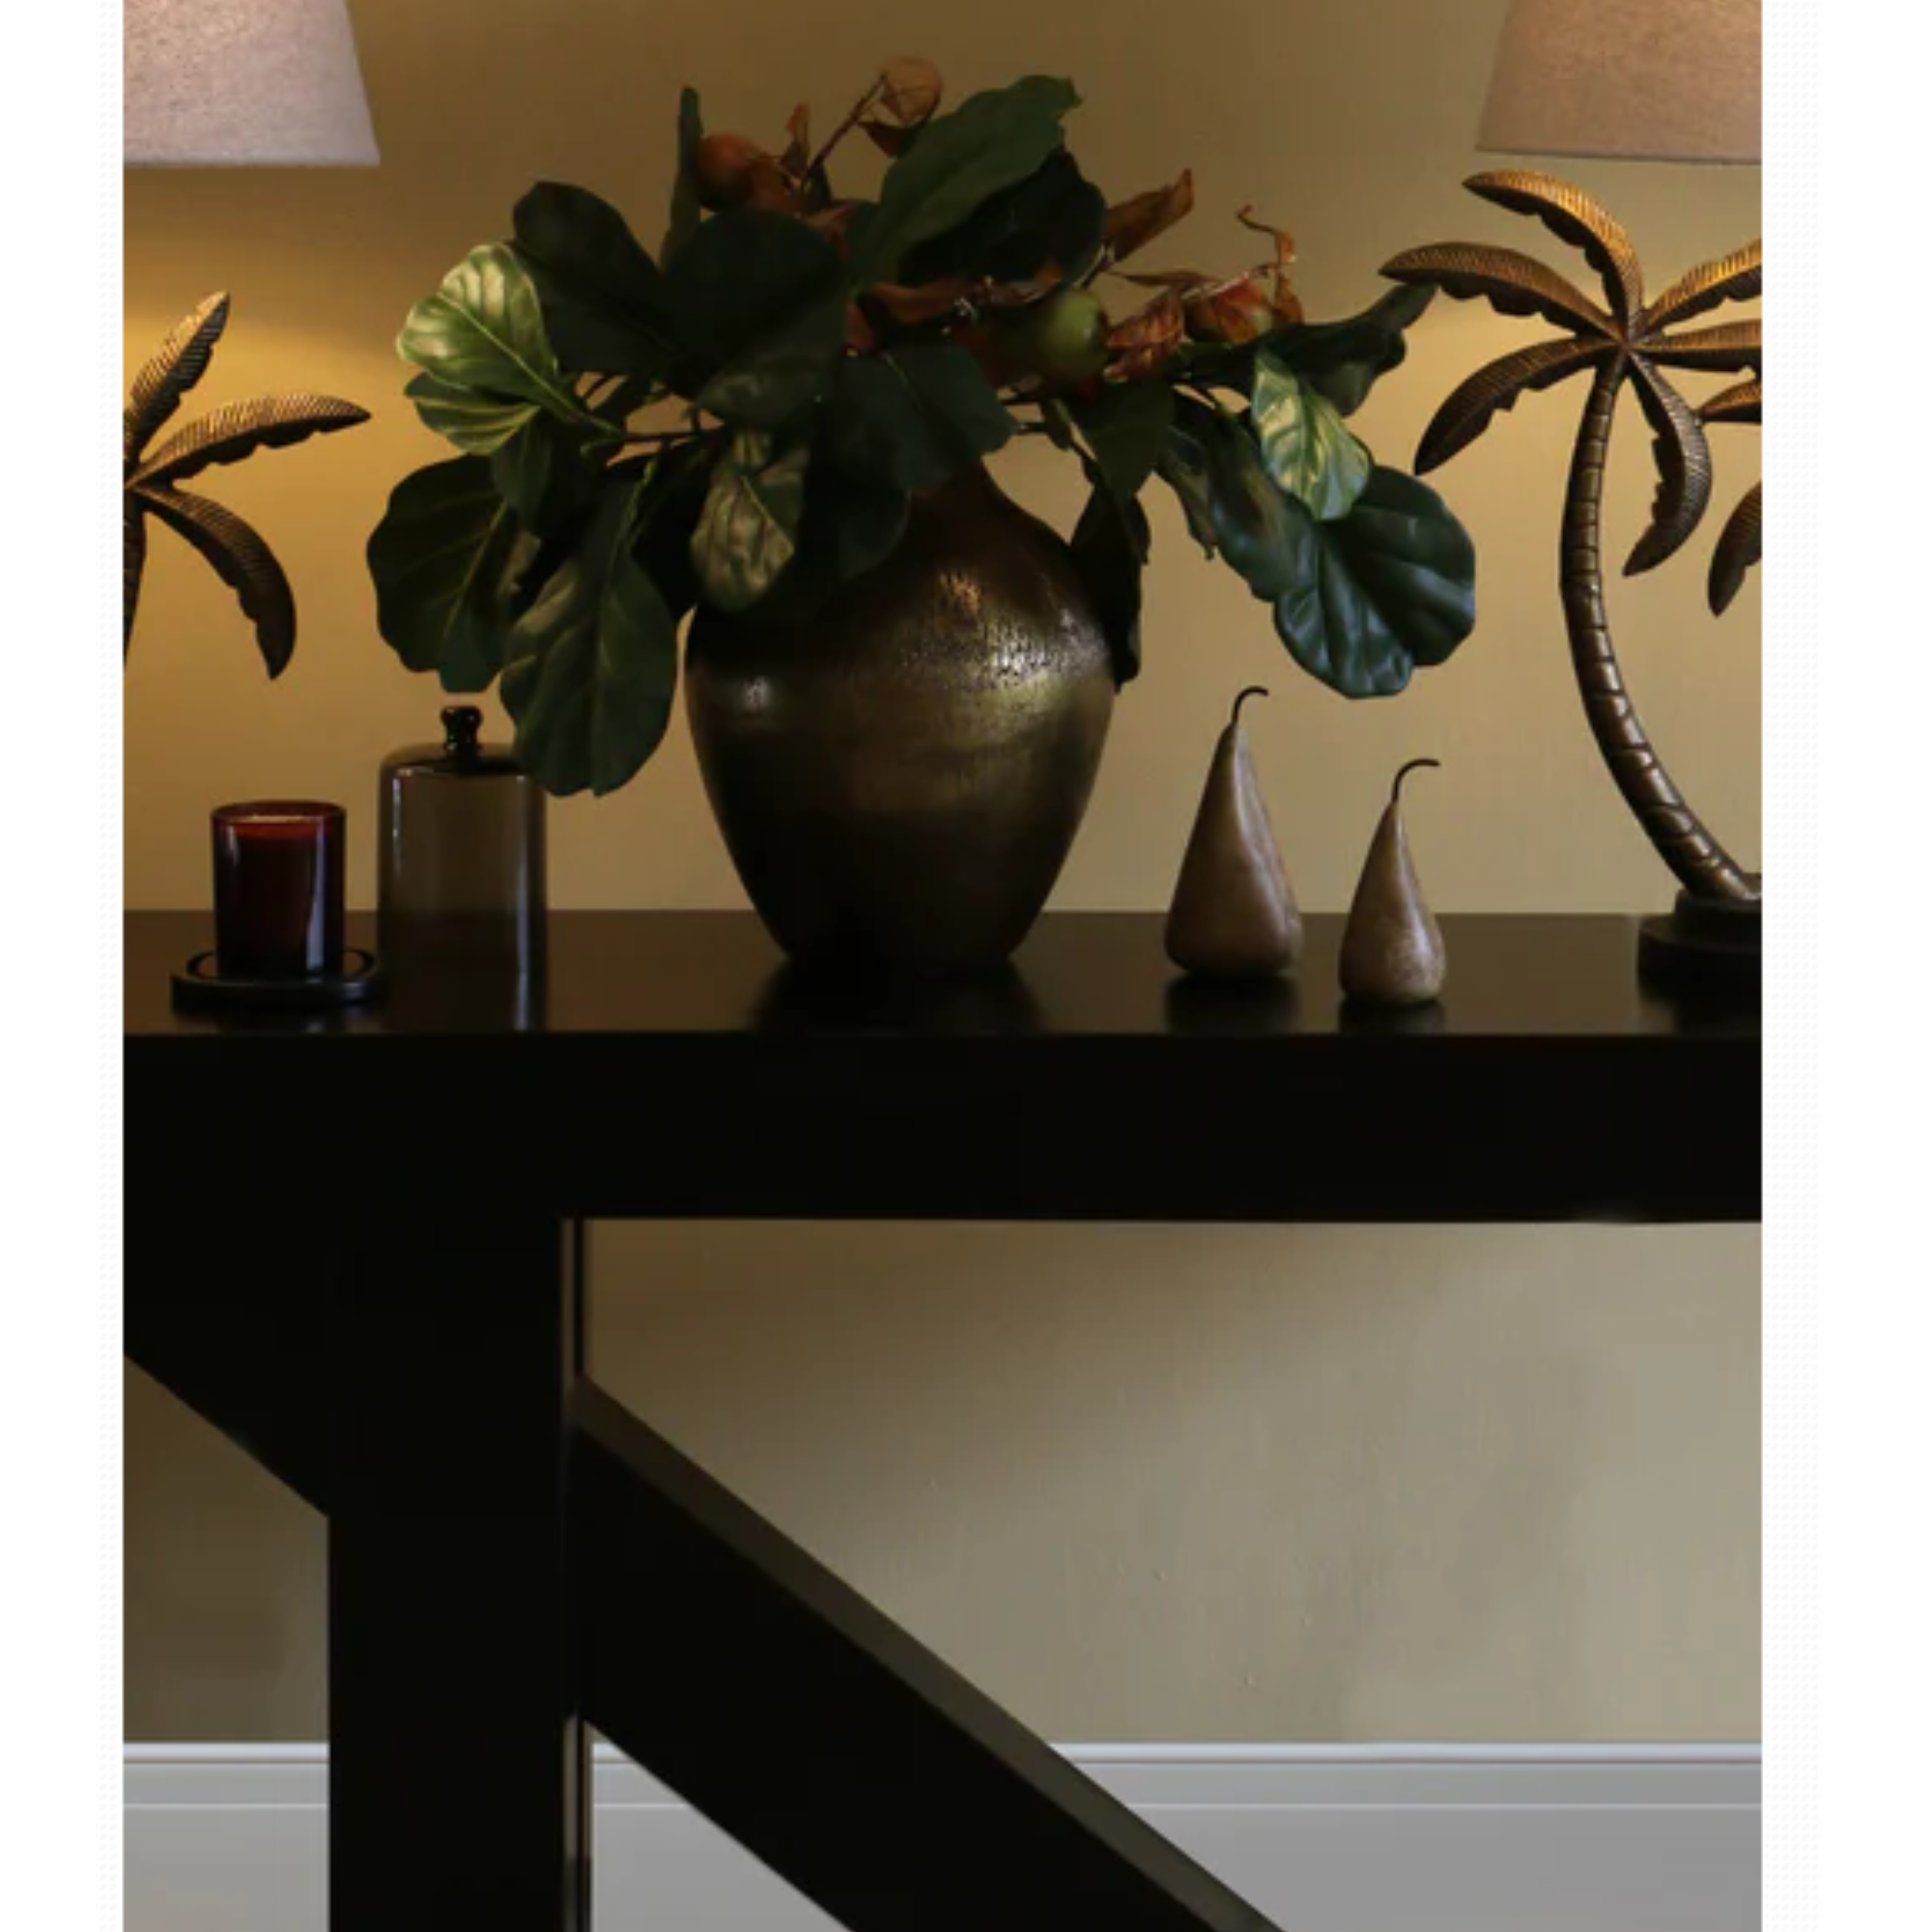 TRIBECA CONSOLE TABLE BLACK IN SOLID MANGO WOOD